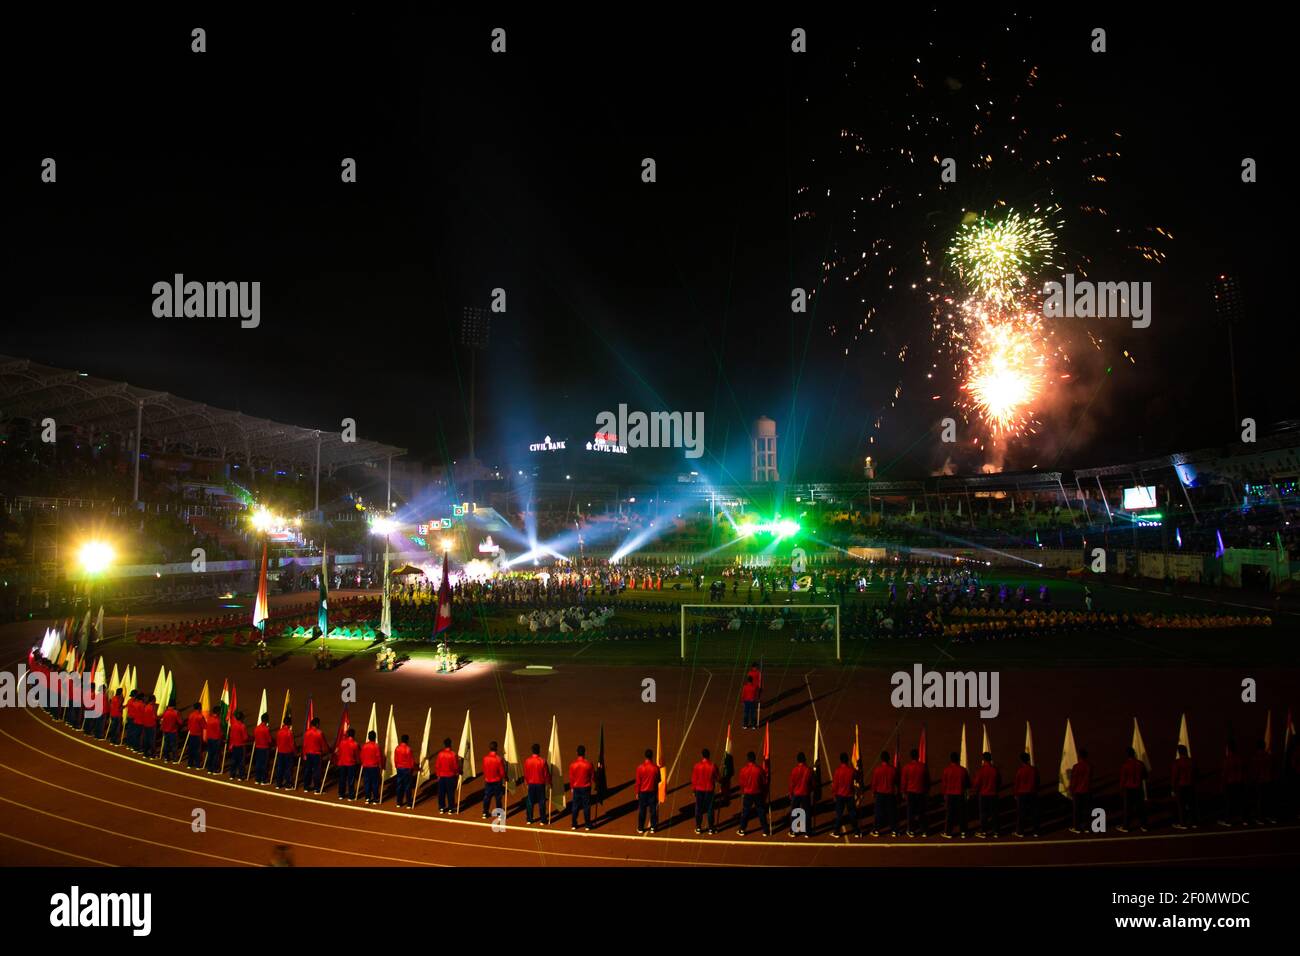 Fireworks display during the opening ceremony of the 13th South Asian Games (SAG) in Kathmandu, Nepal. 01 December 2019. At present, SAG 2019 are joined by seven members namely Bangladesh, Bhutan, India, the Maldives, Nepal, Pakistan, and Sri Lanka. SAG 2019 is being hosted by Nepal and games will be played in Kathmandu and Pokhara from December 1, 2019 to December 10, 2019. 27 games are being played in the 2019 iteration of South Asian Games.. (Photo by Prabin Ranabhat/Pacific Press/Sipa USA) Stock Photo